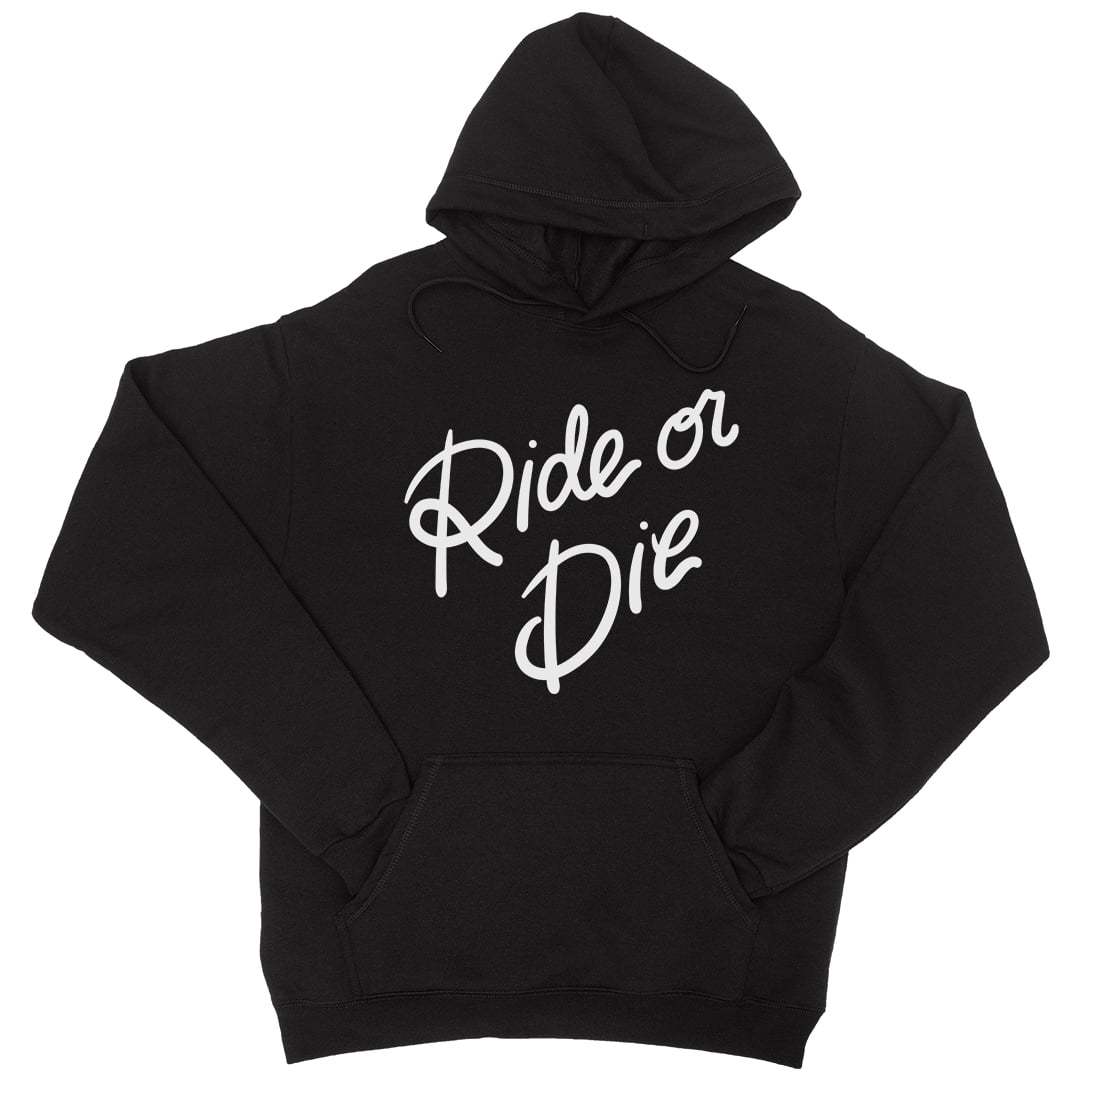 Gift for Her Best friend gift Stay Weird Unisex Black fleece hoodie Thick Material Unisex Hoodies Gift for Him